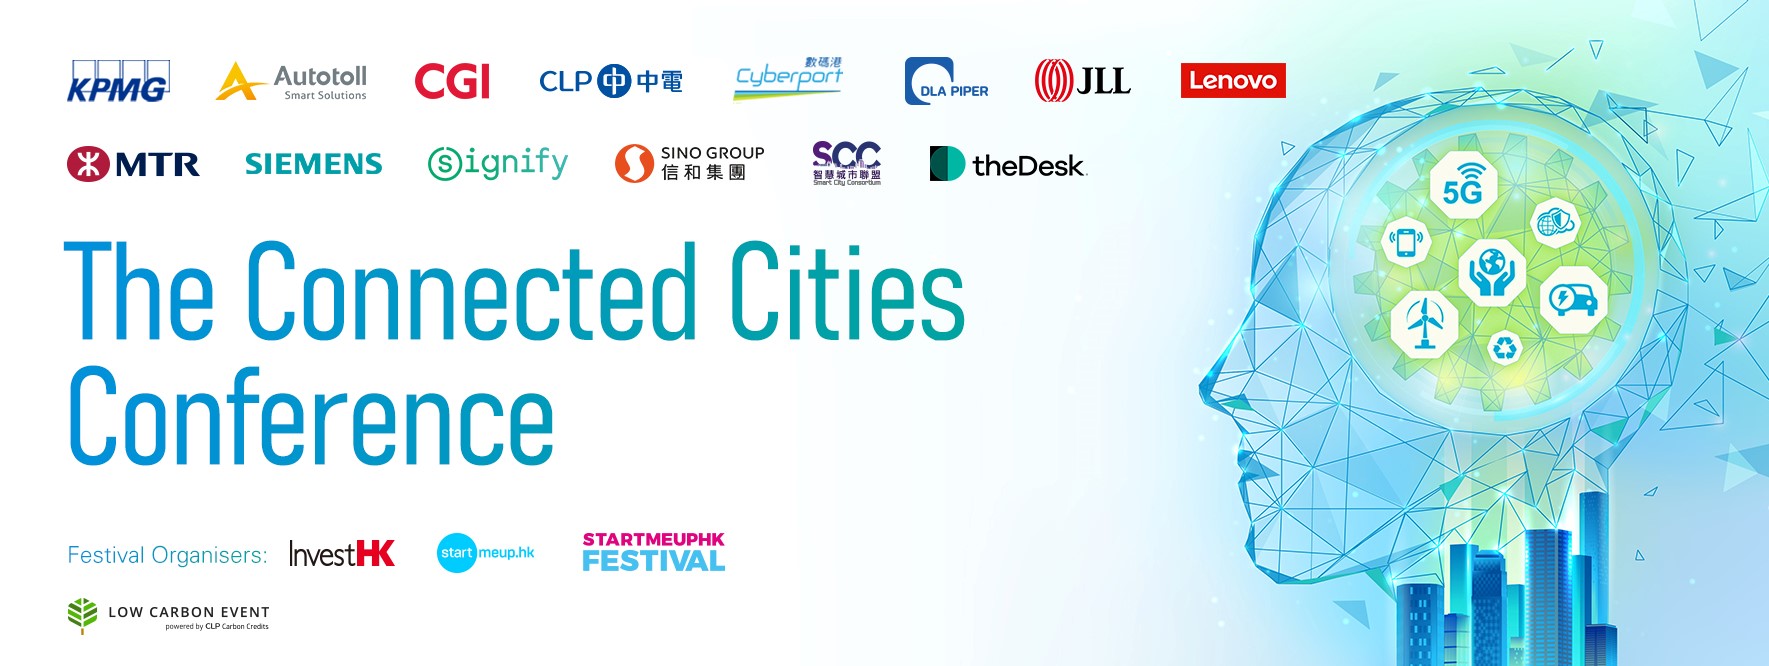 Connected Cities Conference Banner